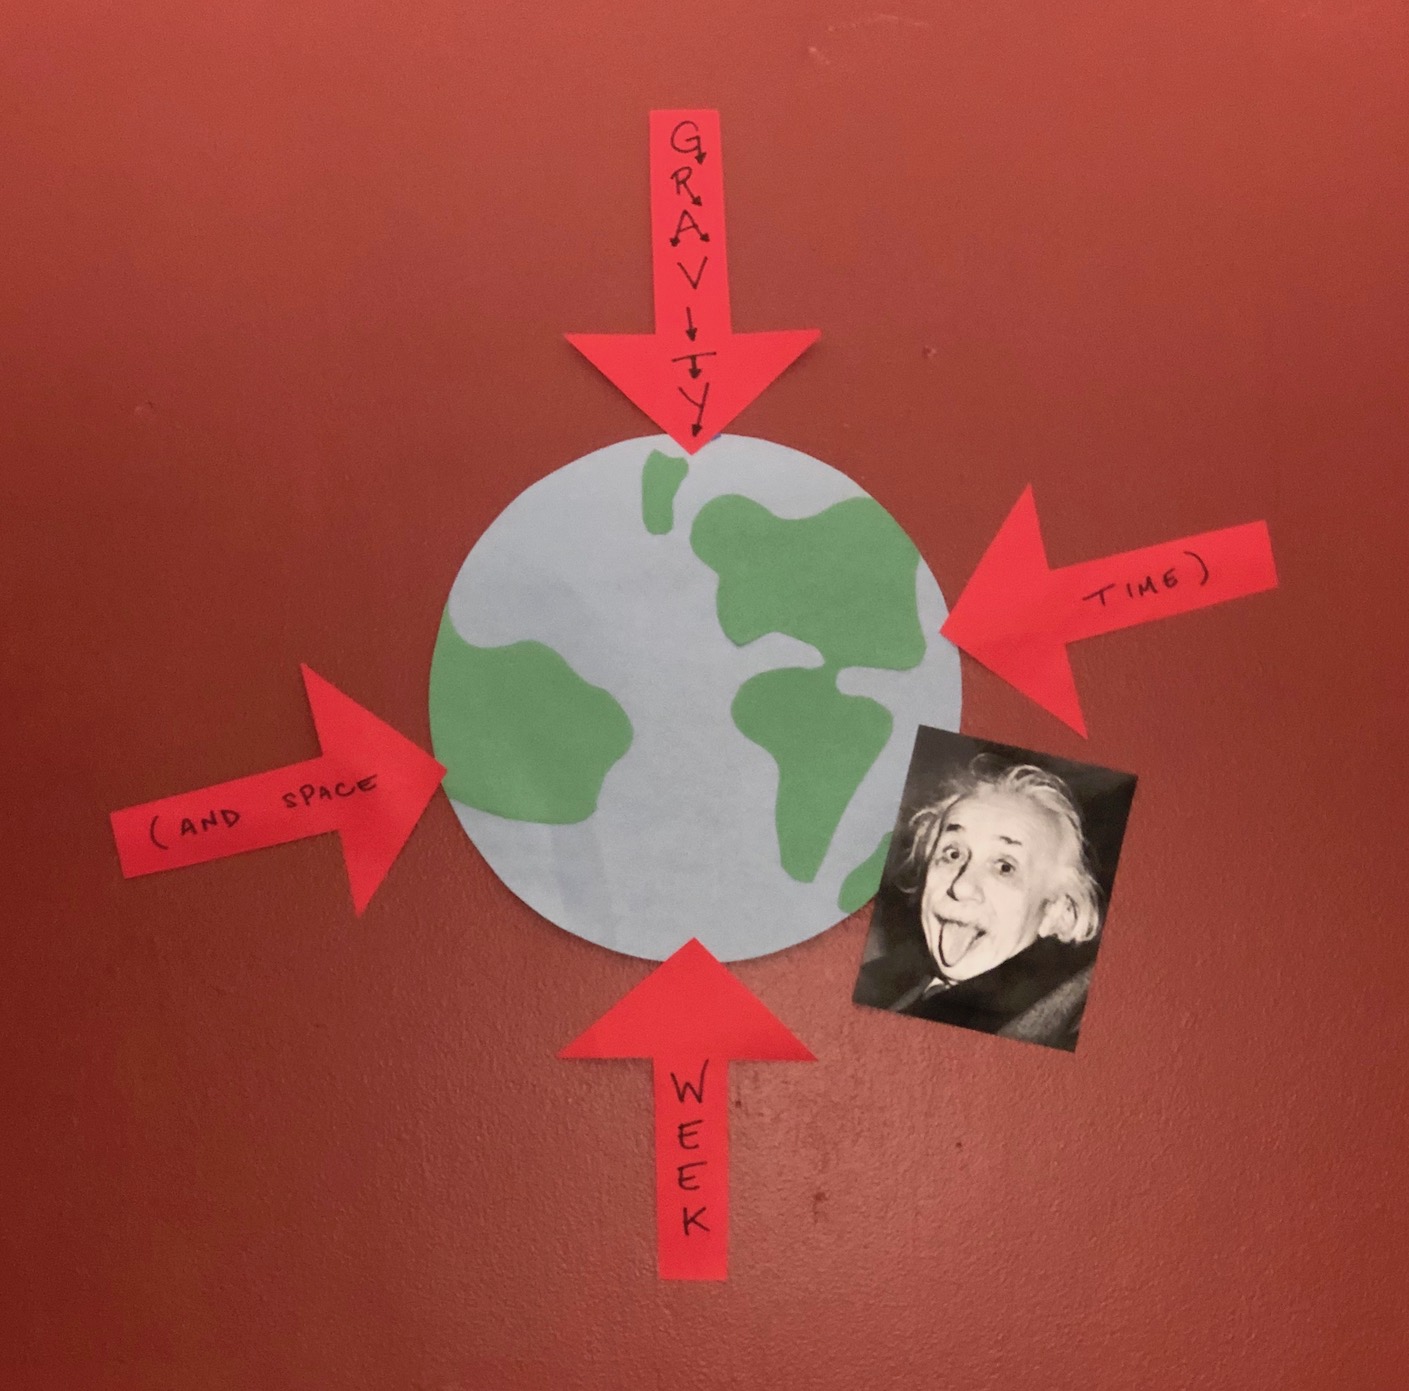 An earth made of construction paper is pasted on a wall. Four red arrows point towards the earth, each with part of the sentence Gravity and Spacetime Week. A picture of Albert Einstein with his tongue out overlaps part of the earth. They are all based on a dark red wall.